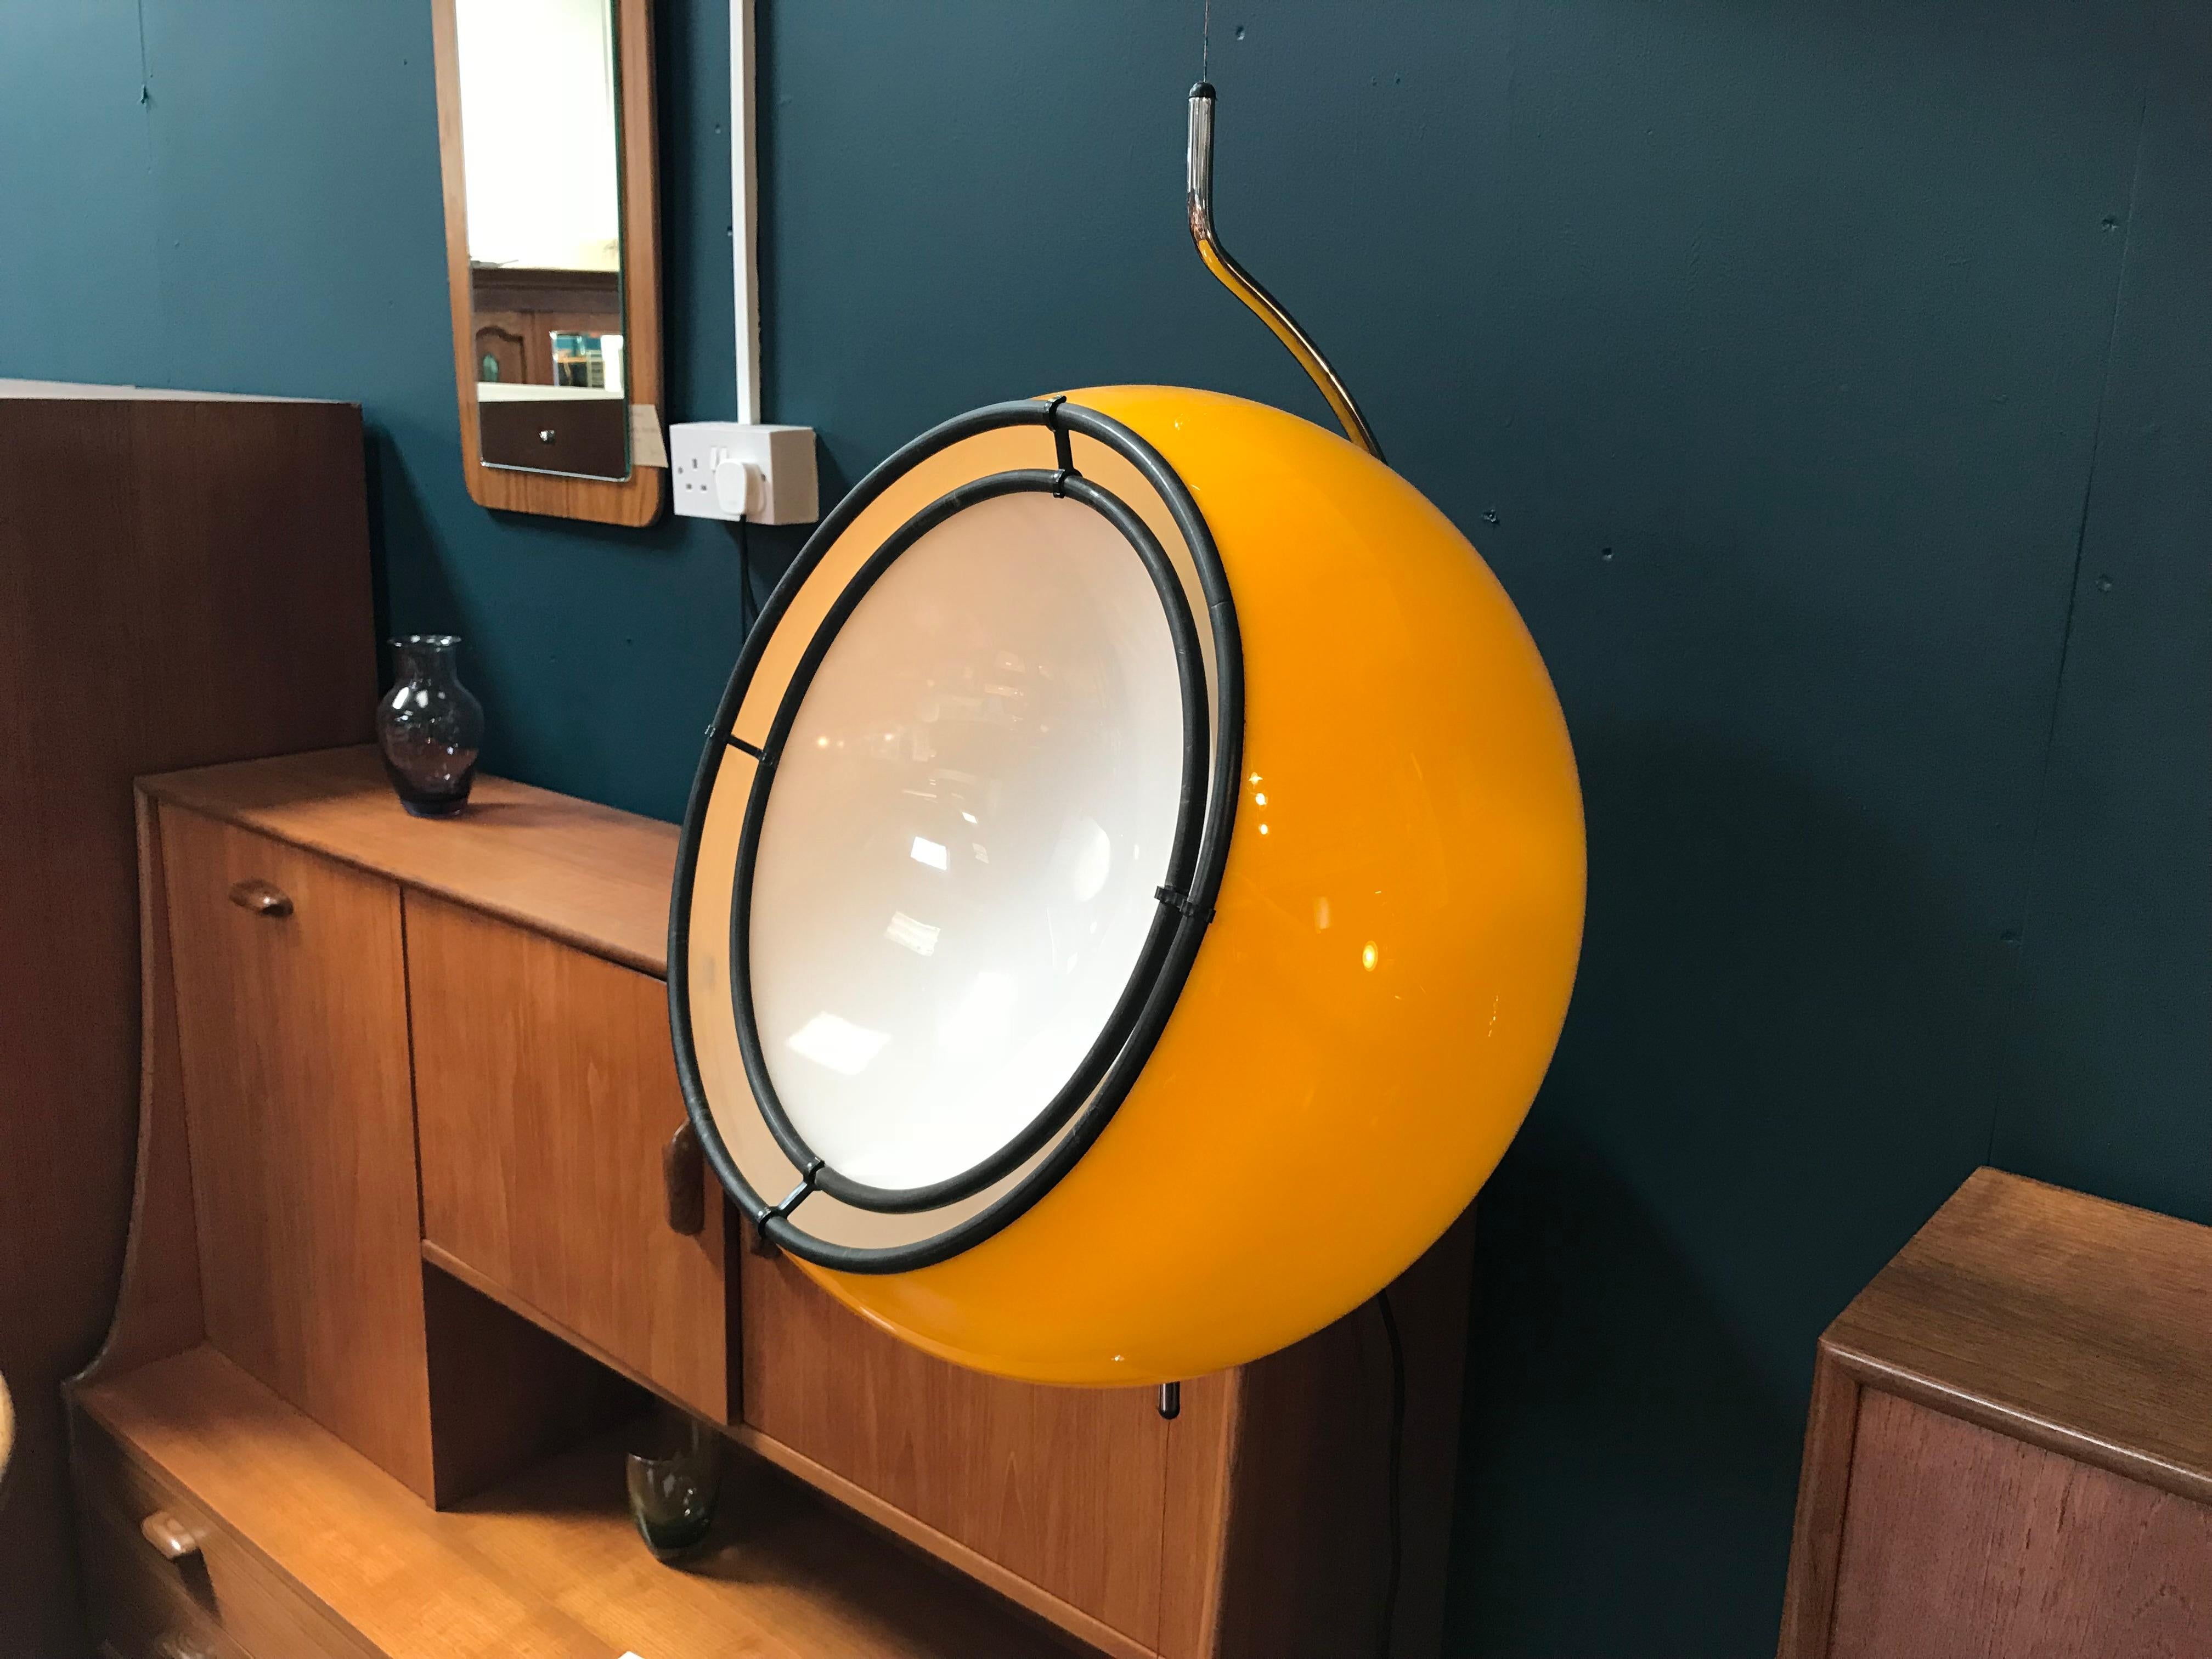 This pendant lamp with a counterweight was made in Italy in the 1970s is reminiscent in style of pieces by designer Gae Aulenti for Harvey Guzzini. This rare yellow version still has its original ‘Guzzini’ label attached and intact.

The yellow